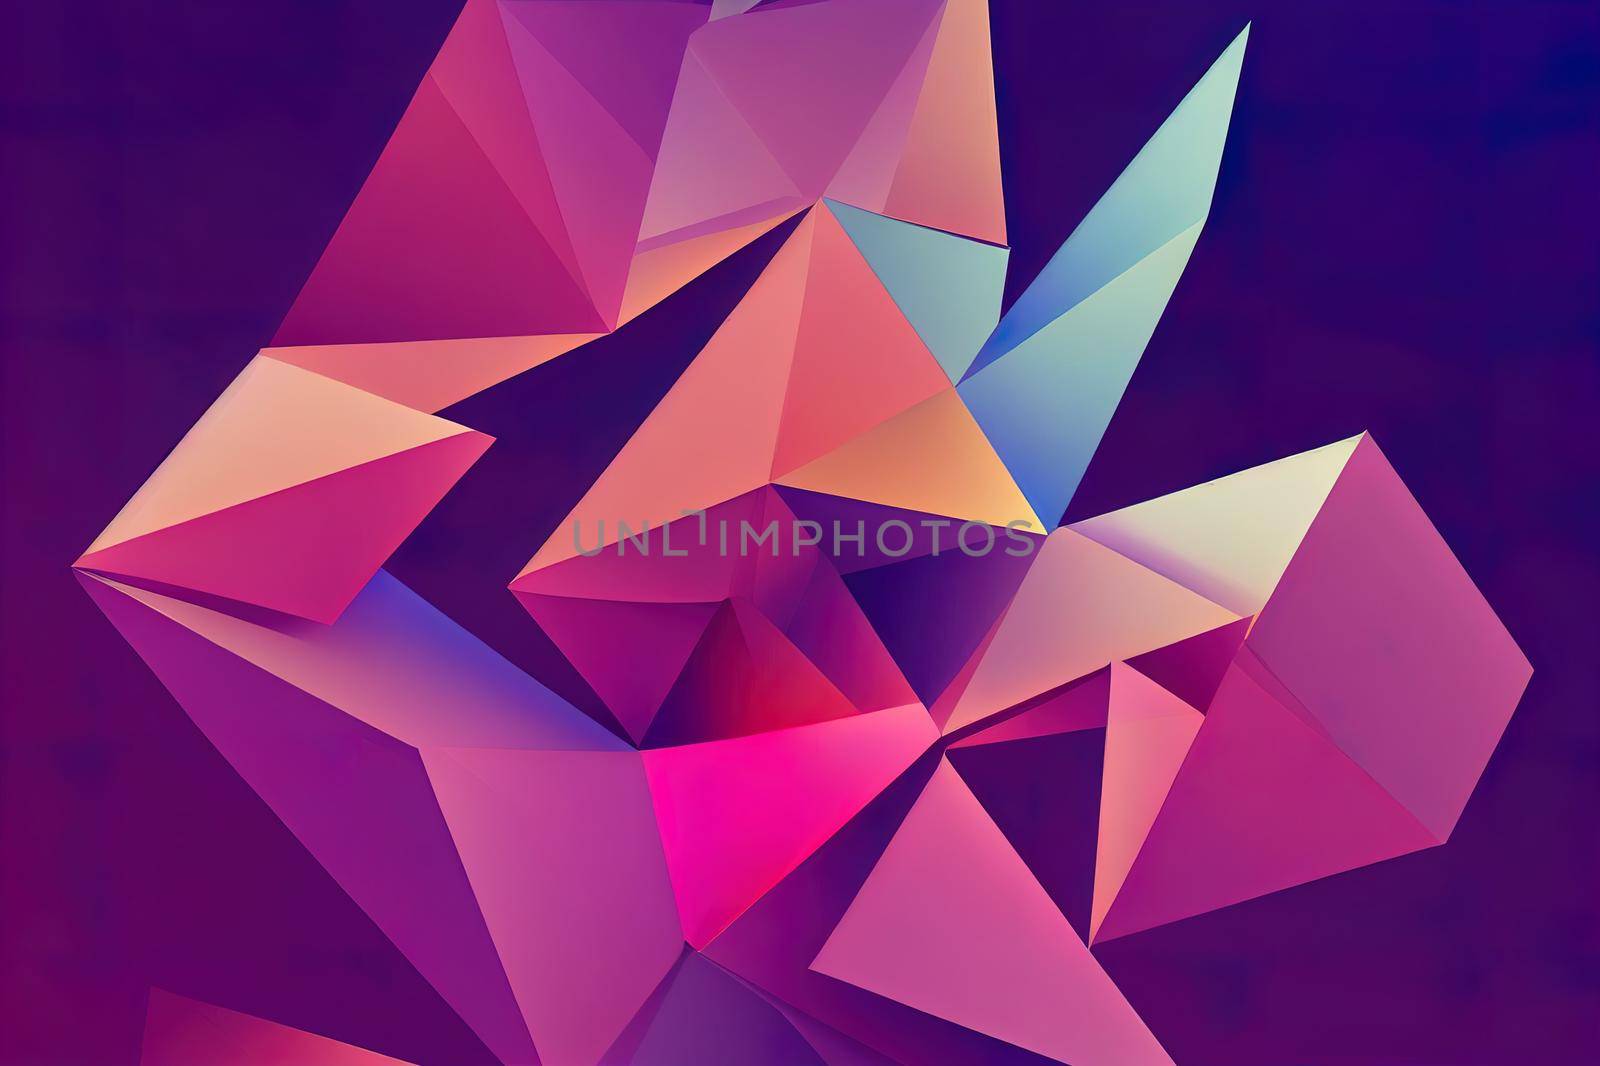 Falling drop of water. Low poly style design. Abstract geometric background. Wireframe light connection structure. Modern 3d graphic concept. Isolated illustration.